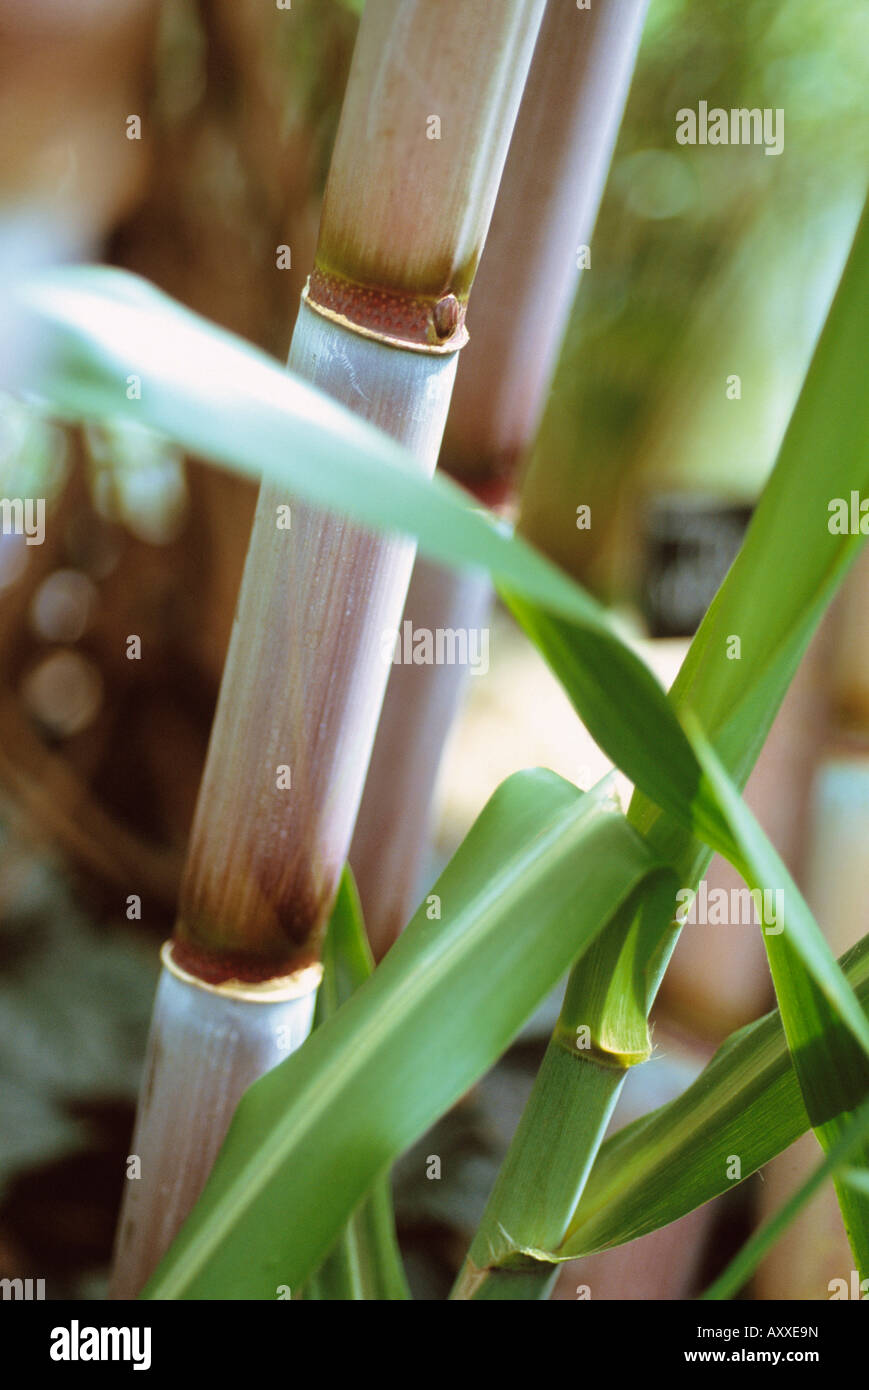 Close-up of Sugar cane, Saccharum officinarum, growing in a field. Stock Photo